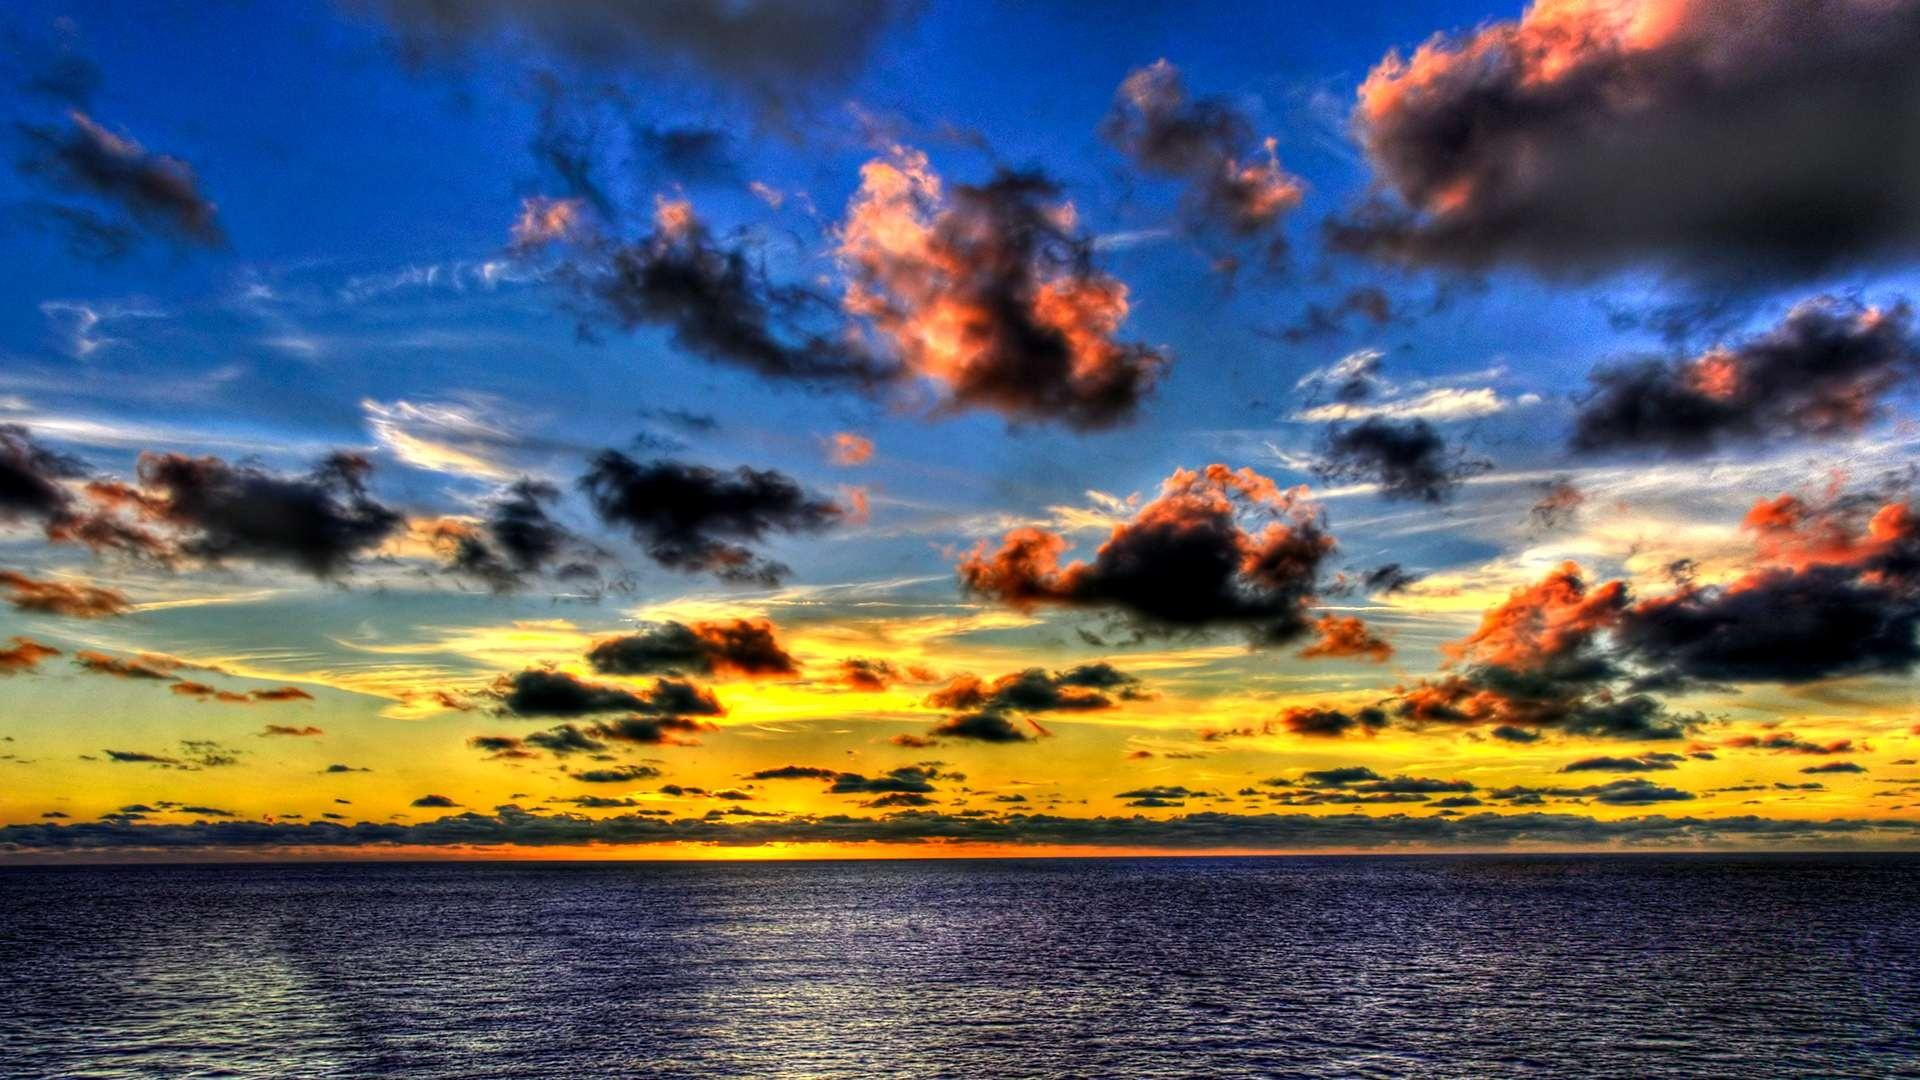 Beautiful Ocean Sky Hdr, sunset, clouds, nature and landscapes